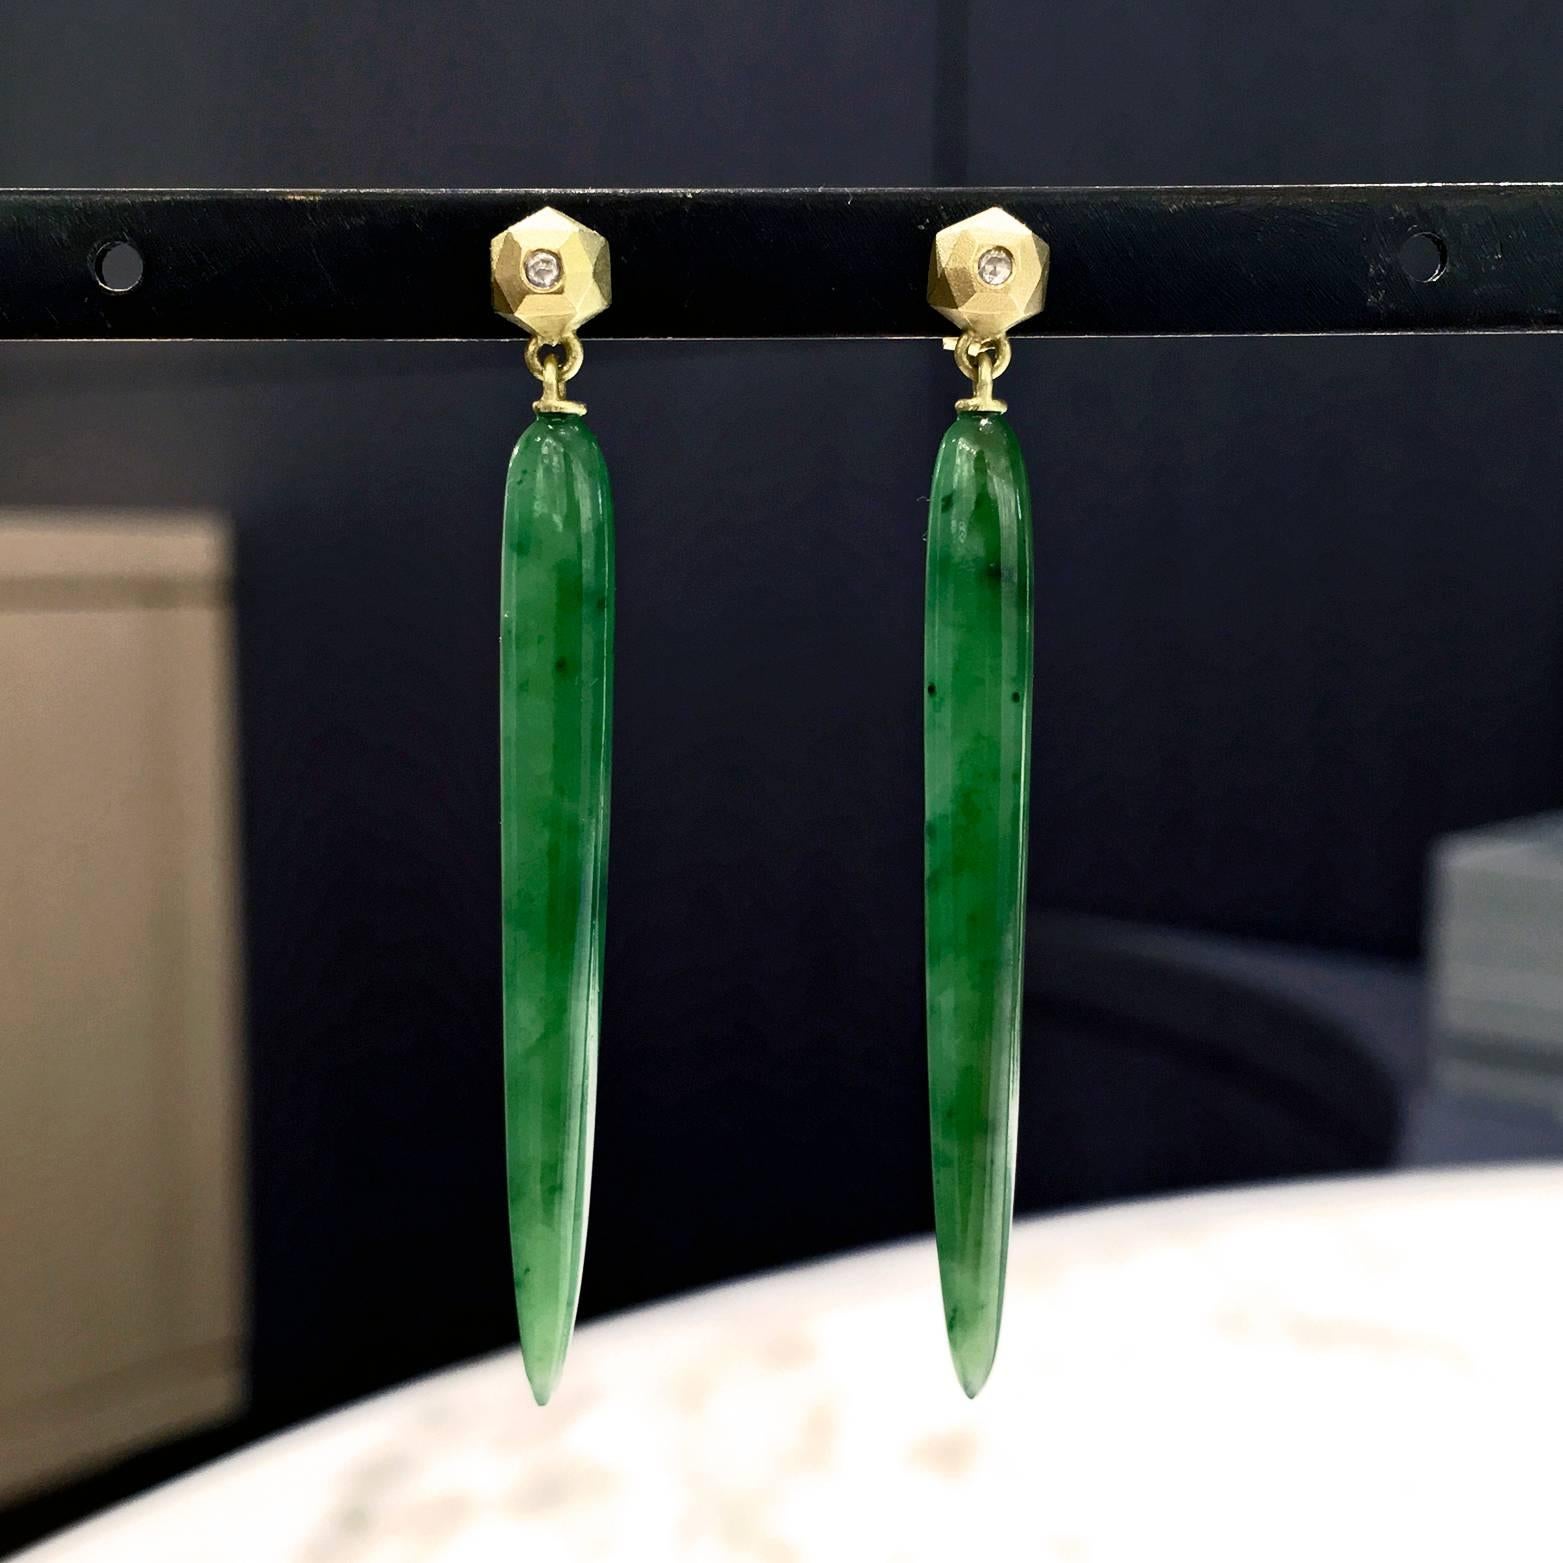 One-of-a-Kind Earrings handmade featuring 16.02 total carats of beautiful Siberian jade dangling from matte-finished 18k yellow gold hedra elements  with bezel-set rose-cut diamonds.